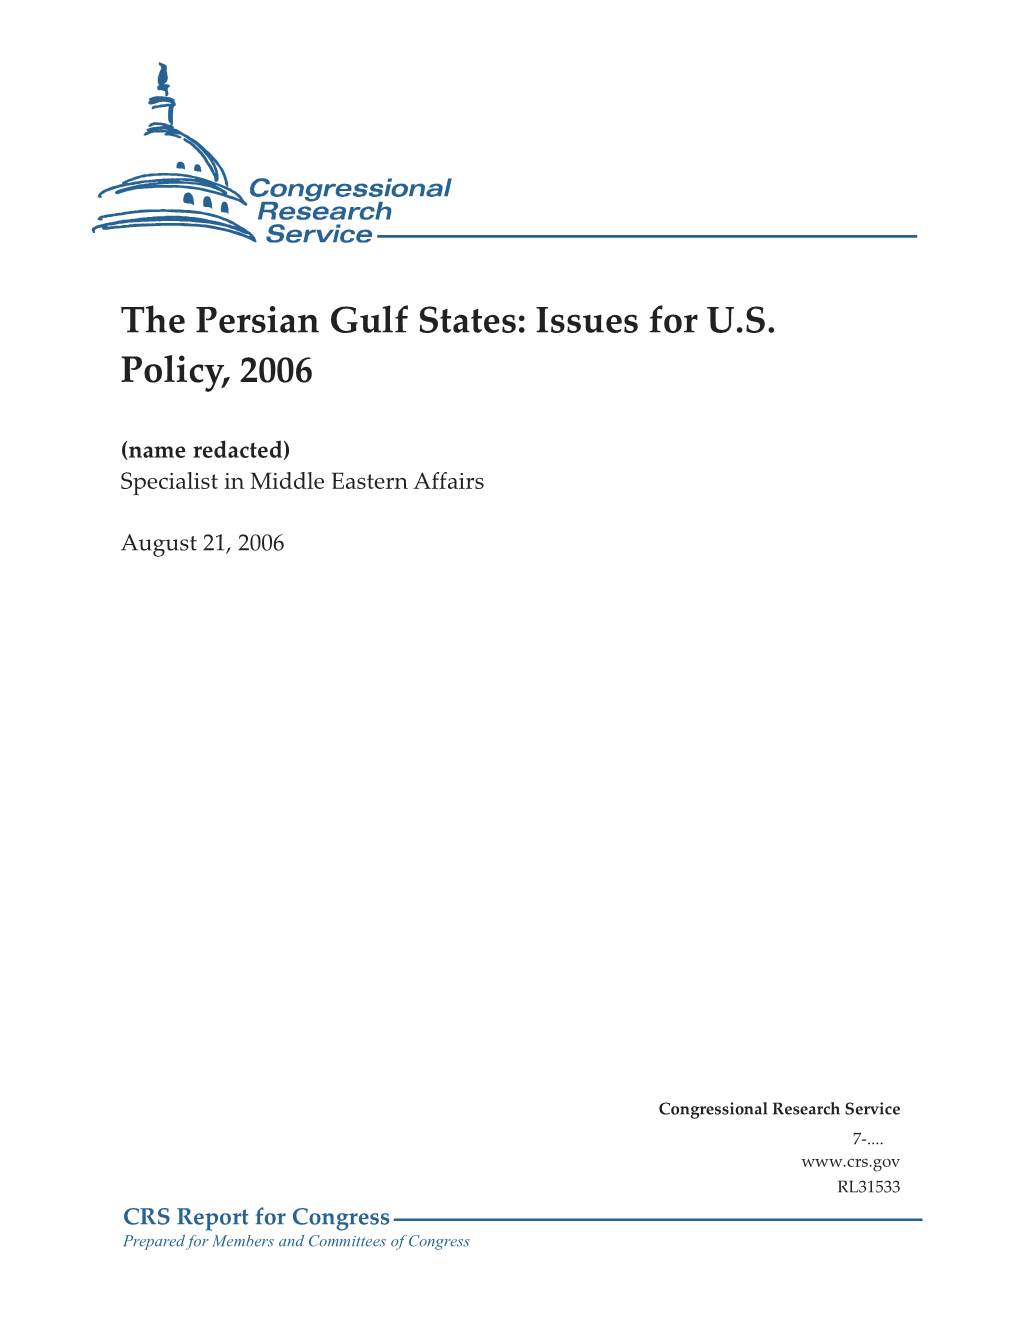 The Persian Gulf States: Issues for US Policy, 2006